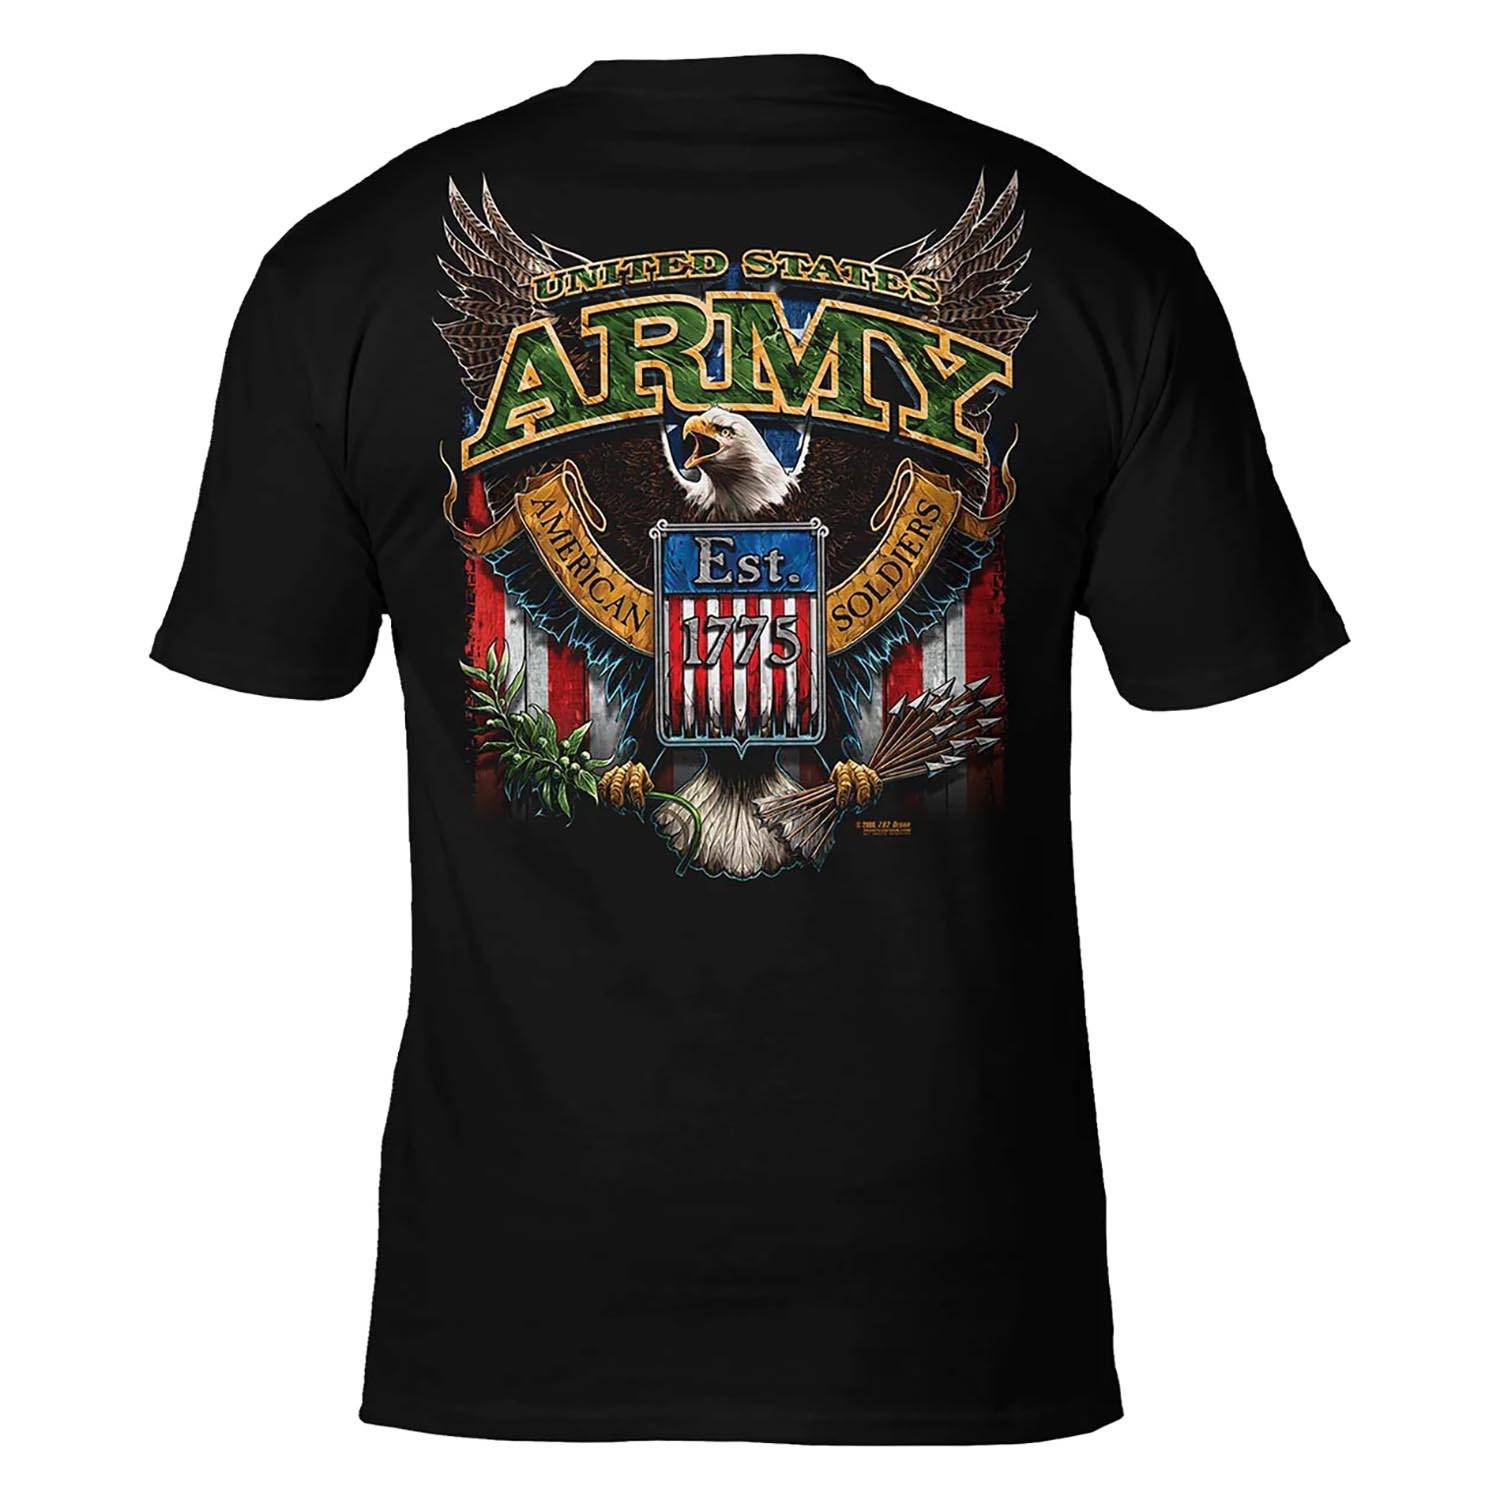 7.62 Design Army Fighting Eagle T-Shirt